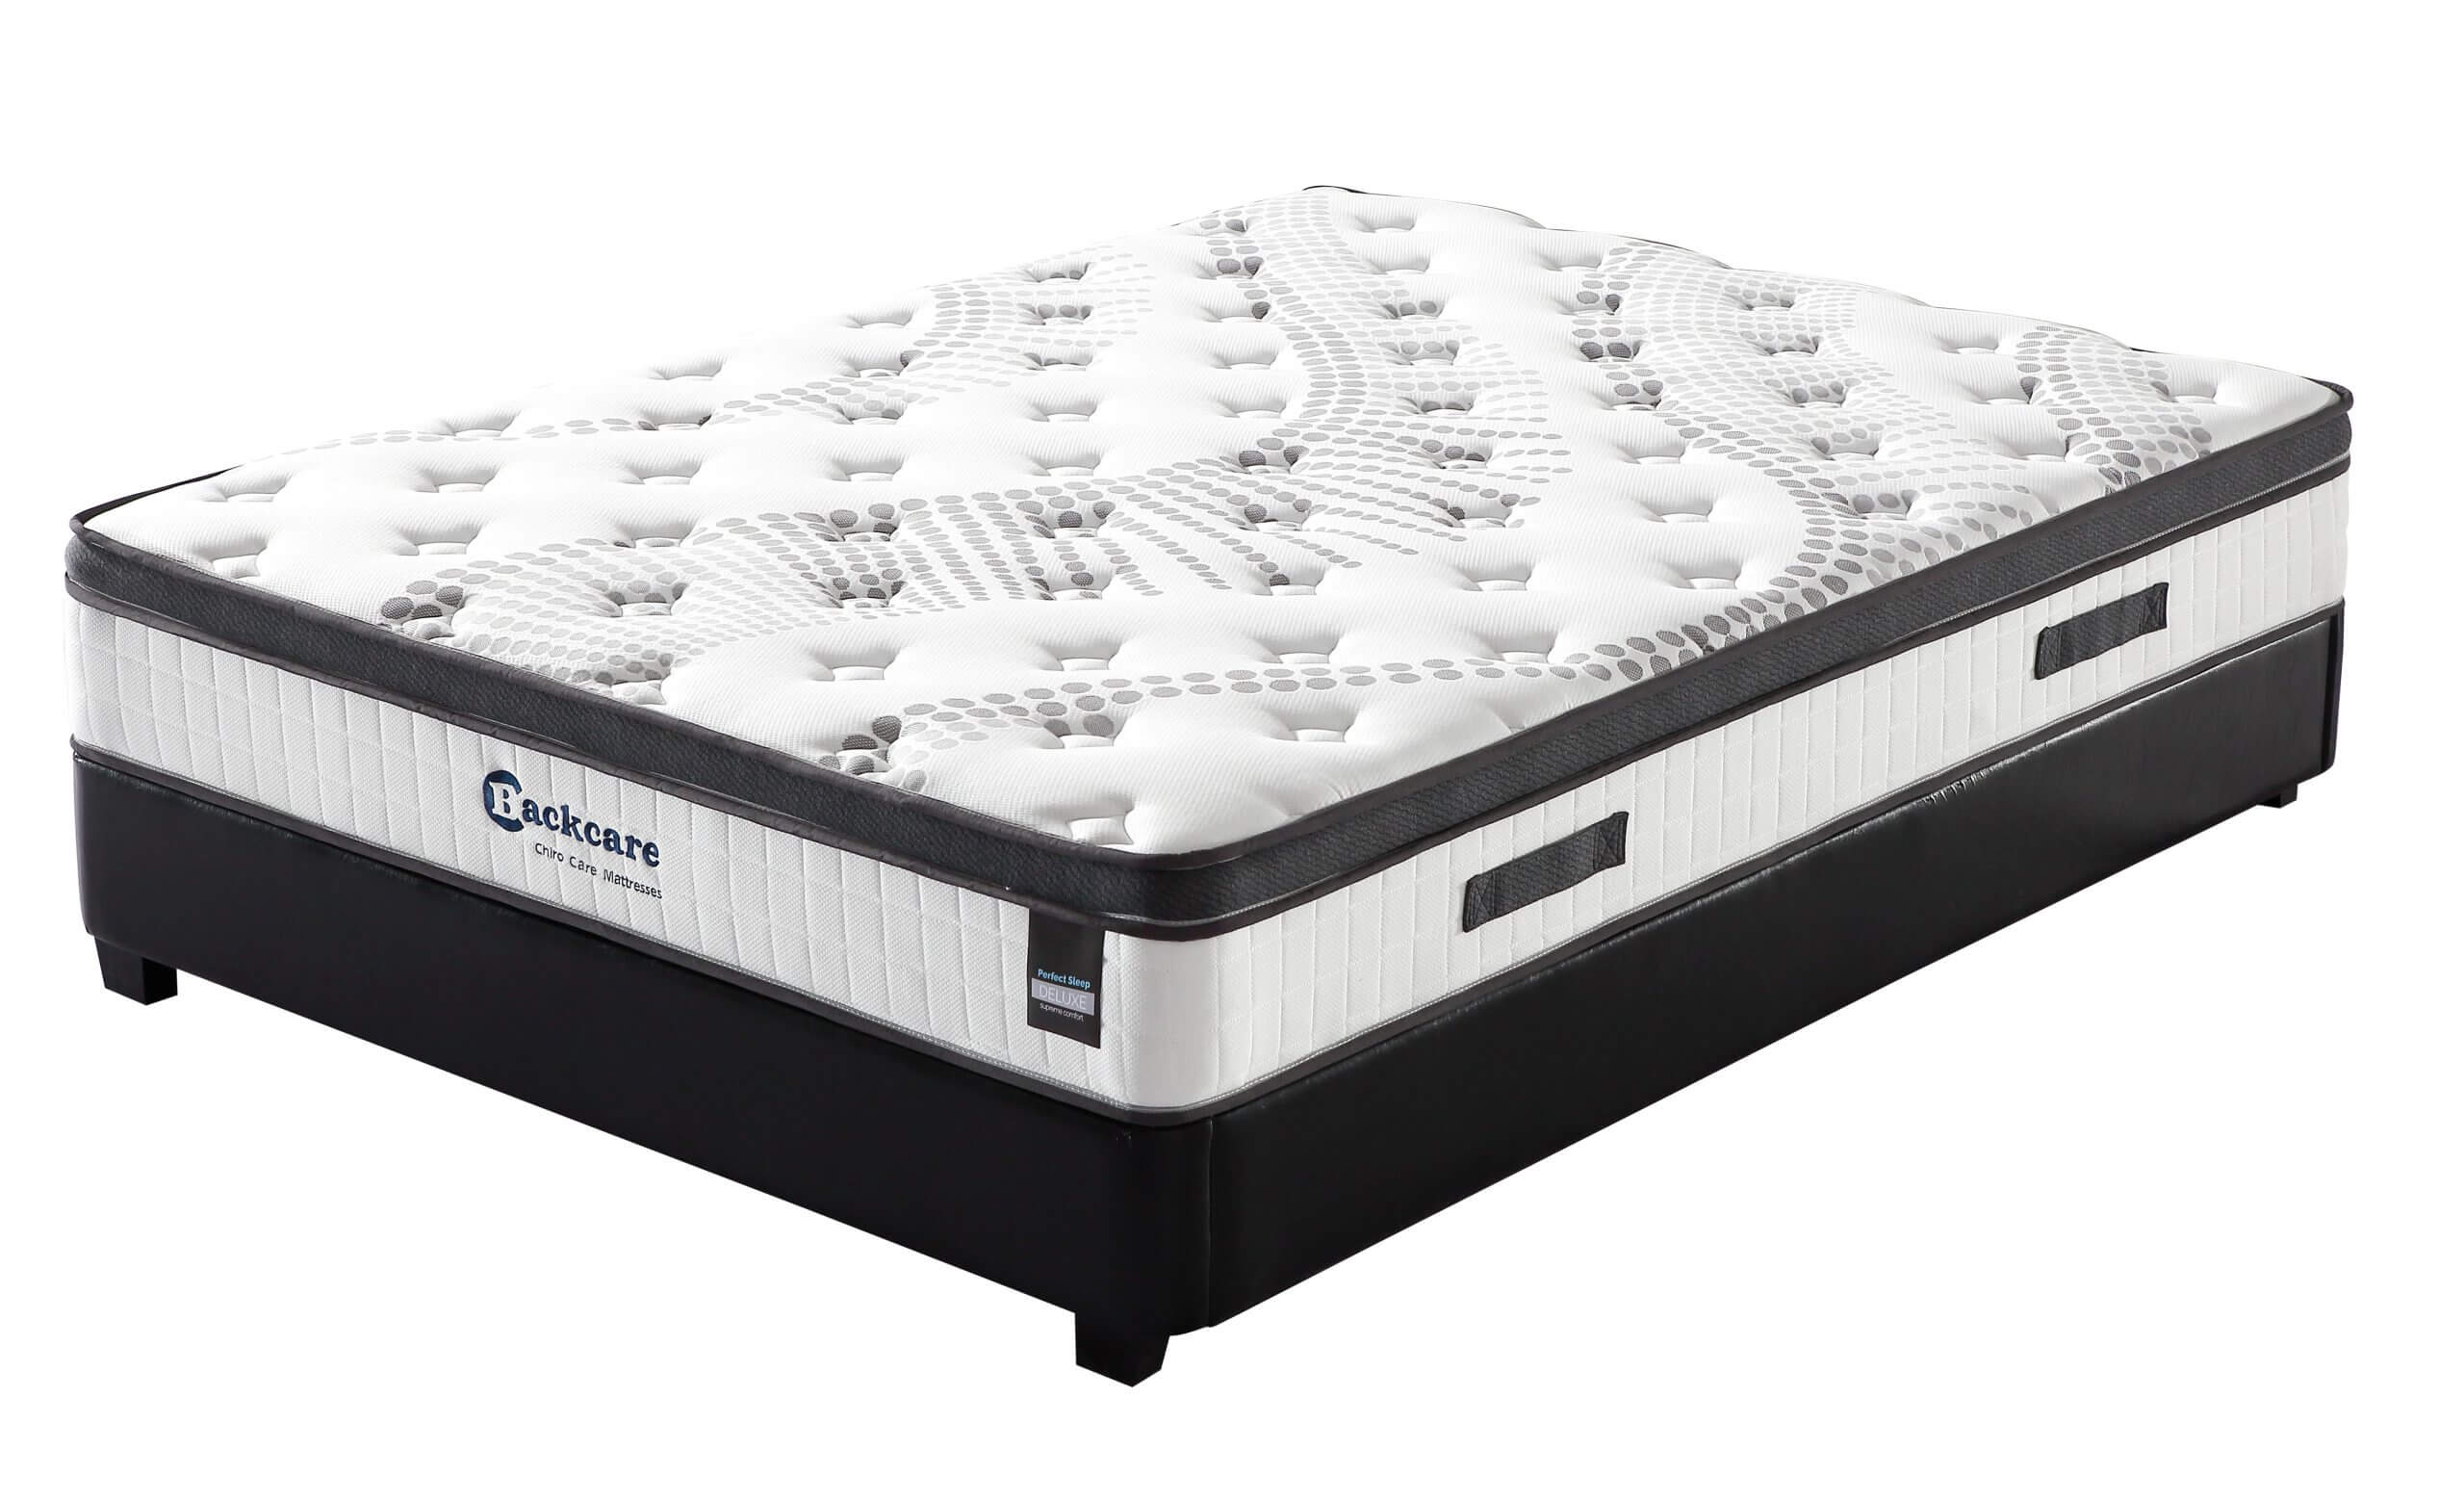 Chiro Care Bed & Mattress Bundle Deal in Double / Queen / King